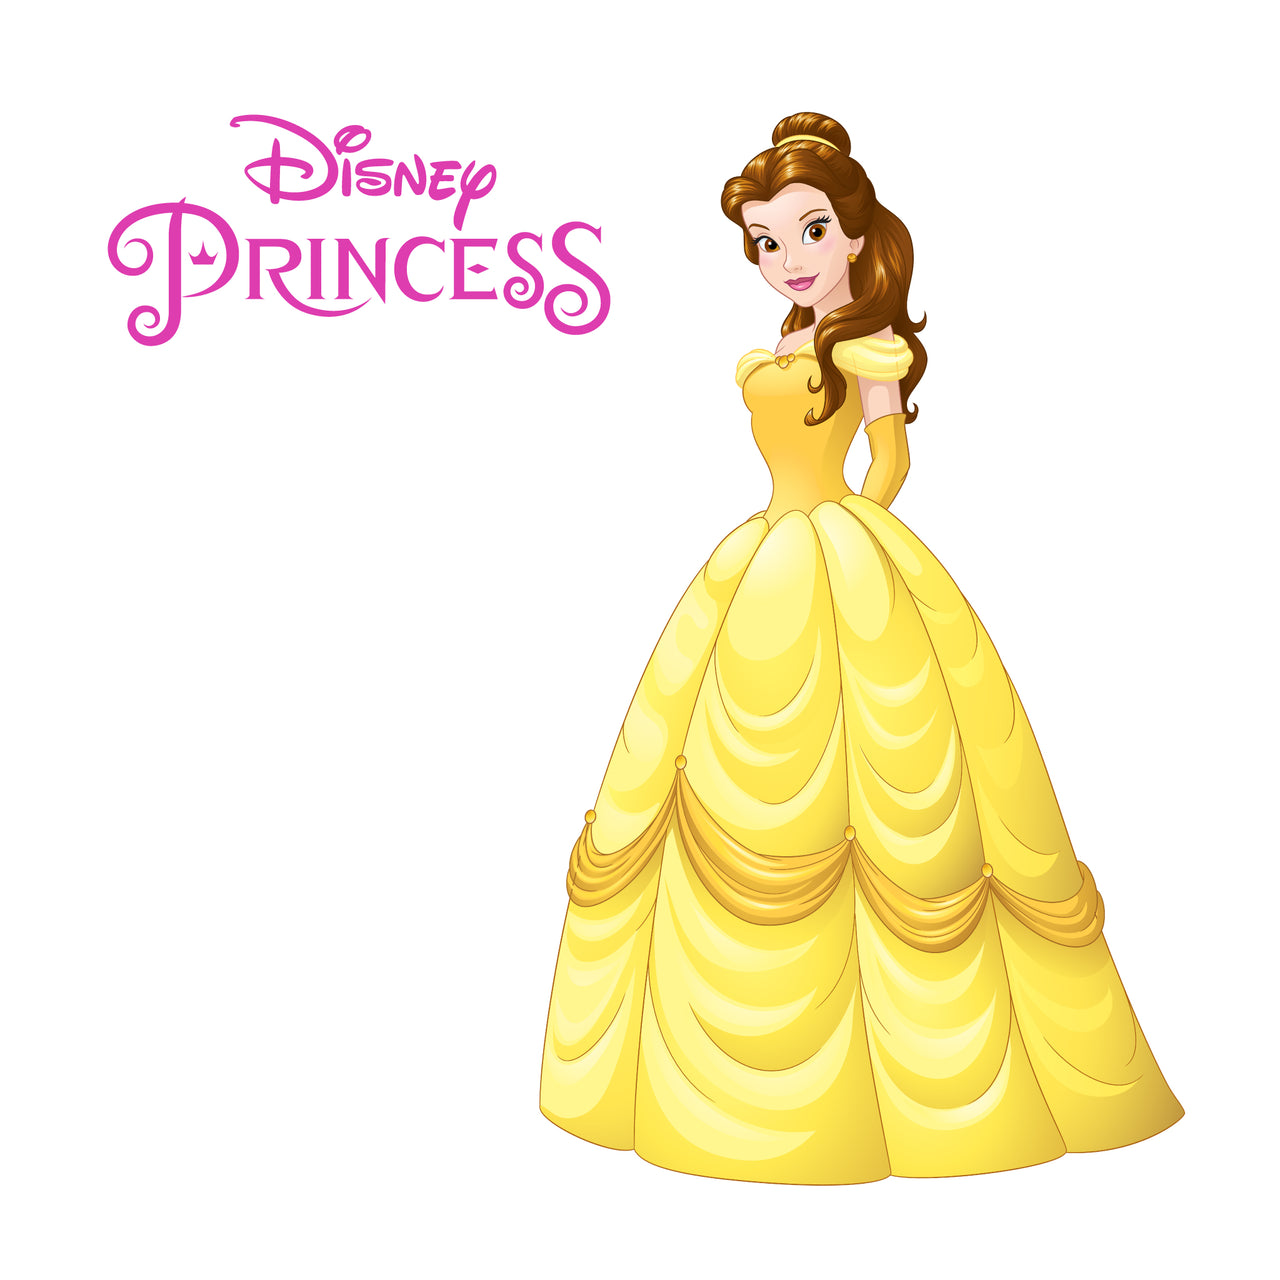 Princess Belle Interactive Wall Decal